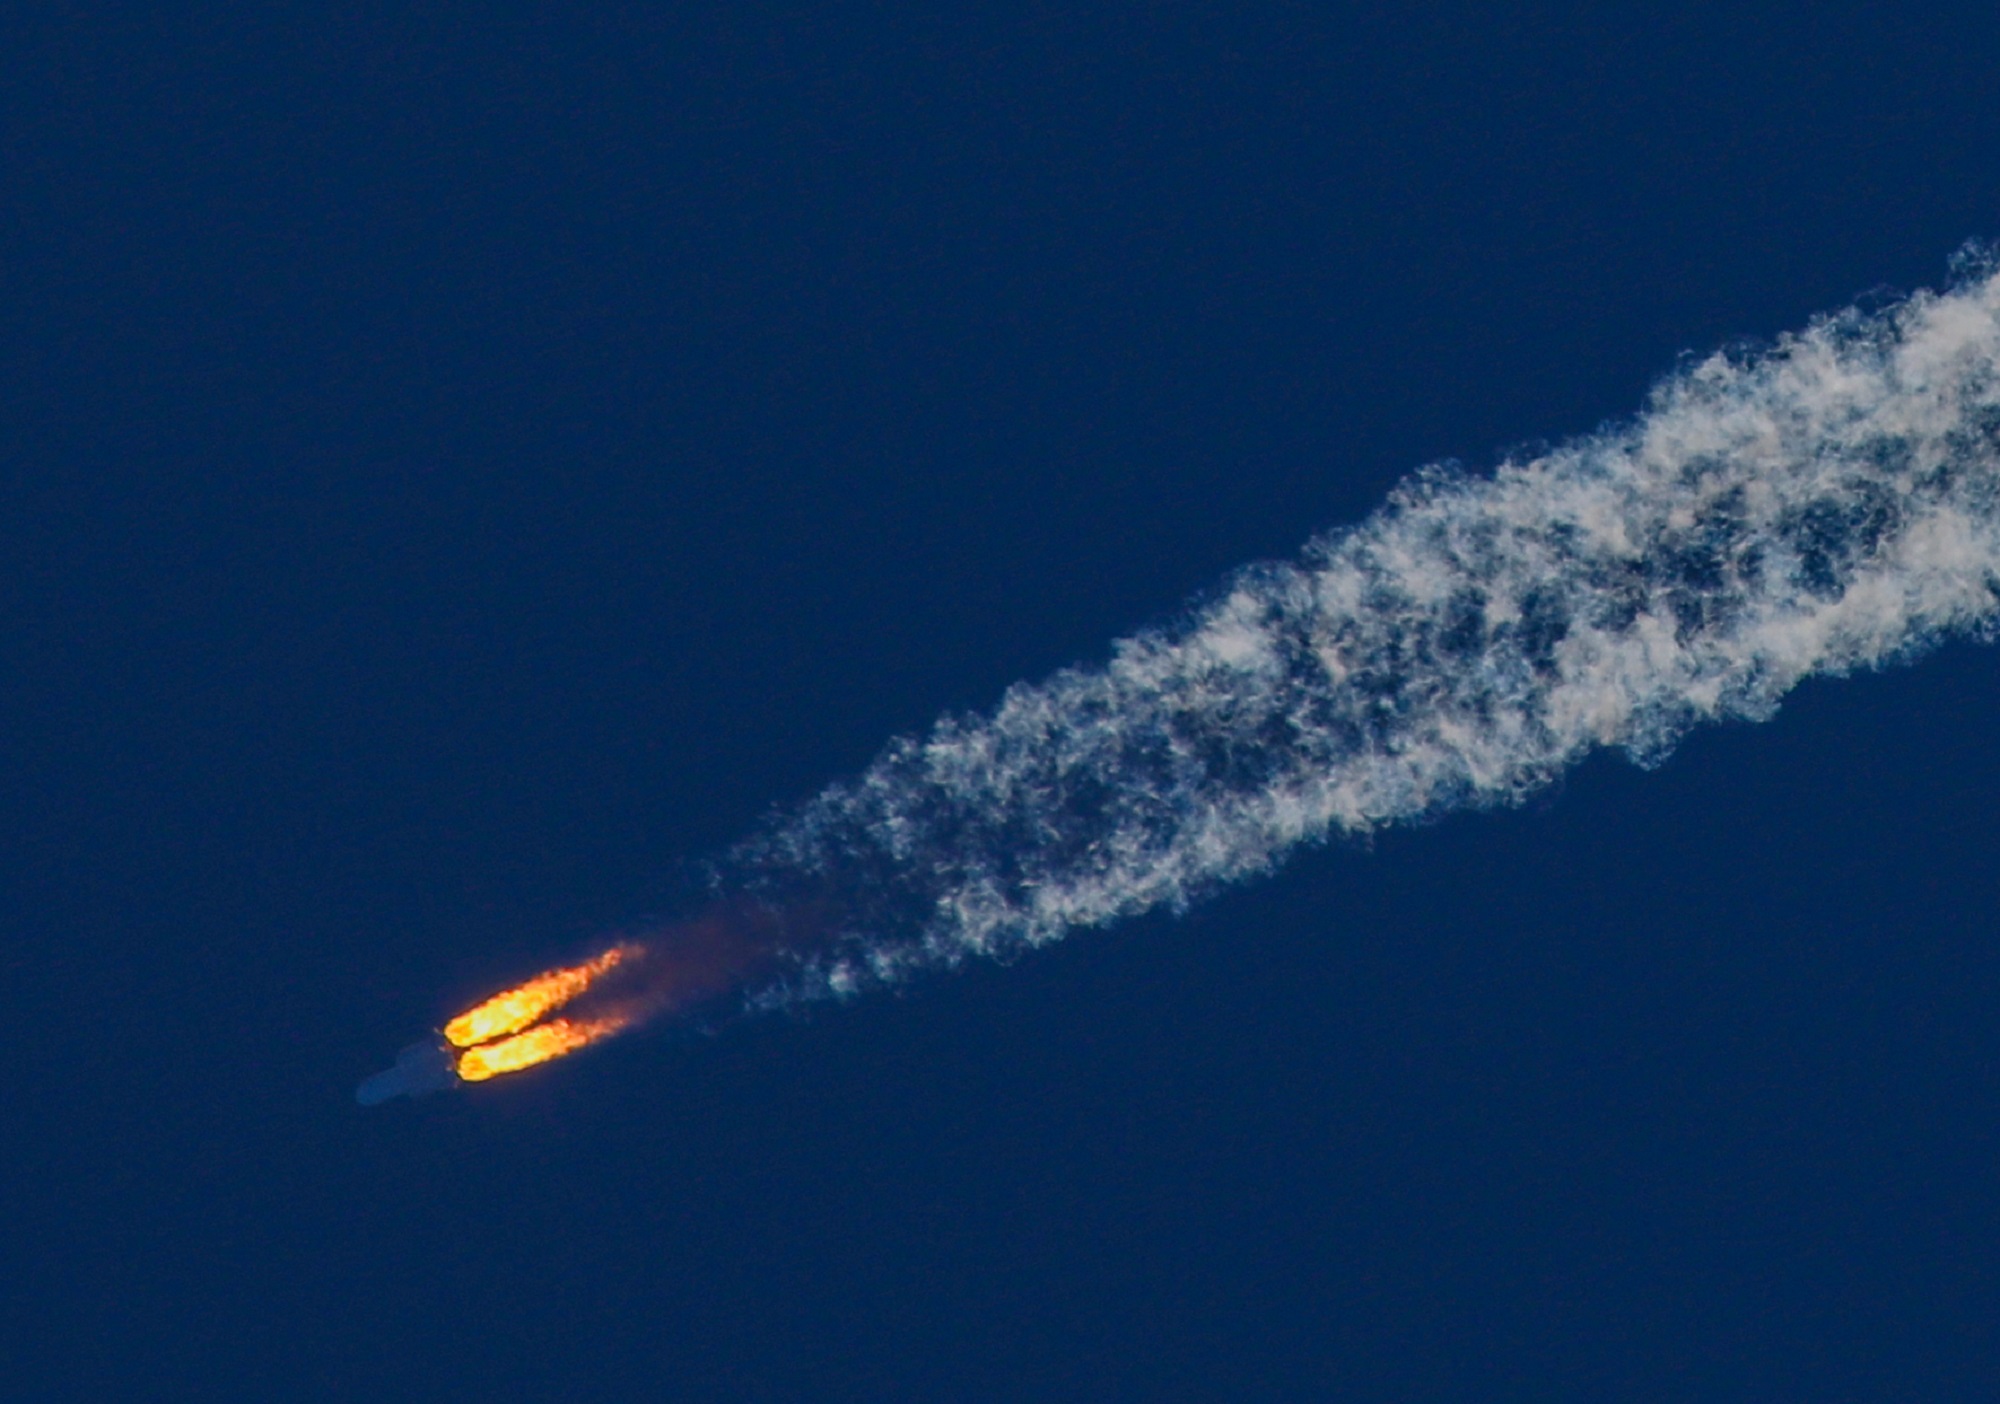 The chance of being hit by China’s falling rocket booster is very low